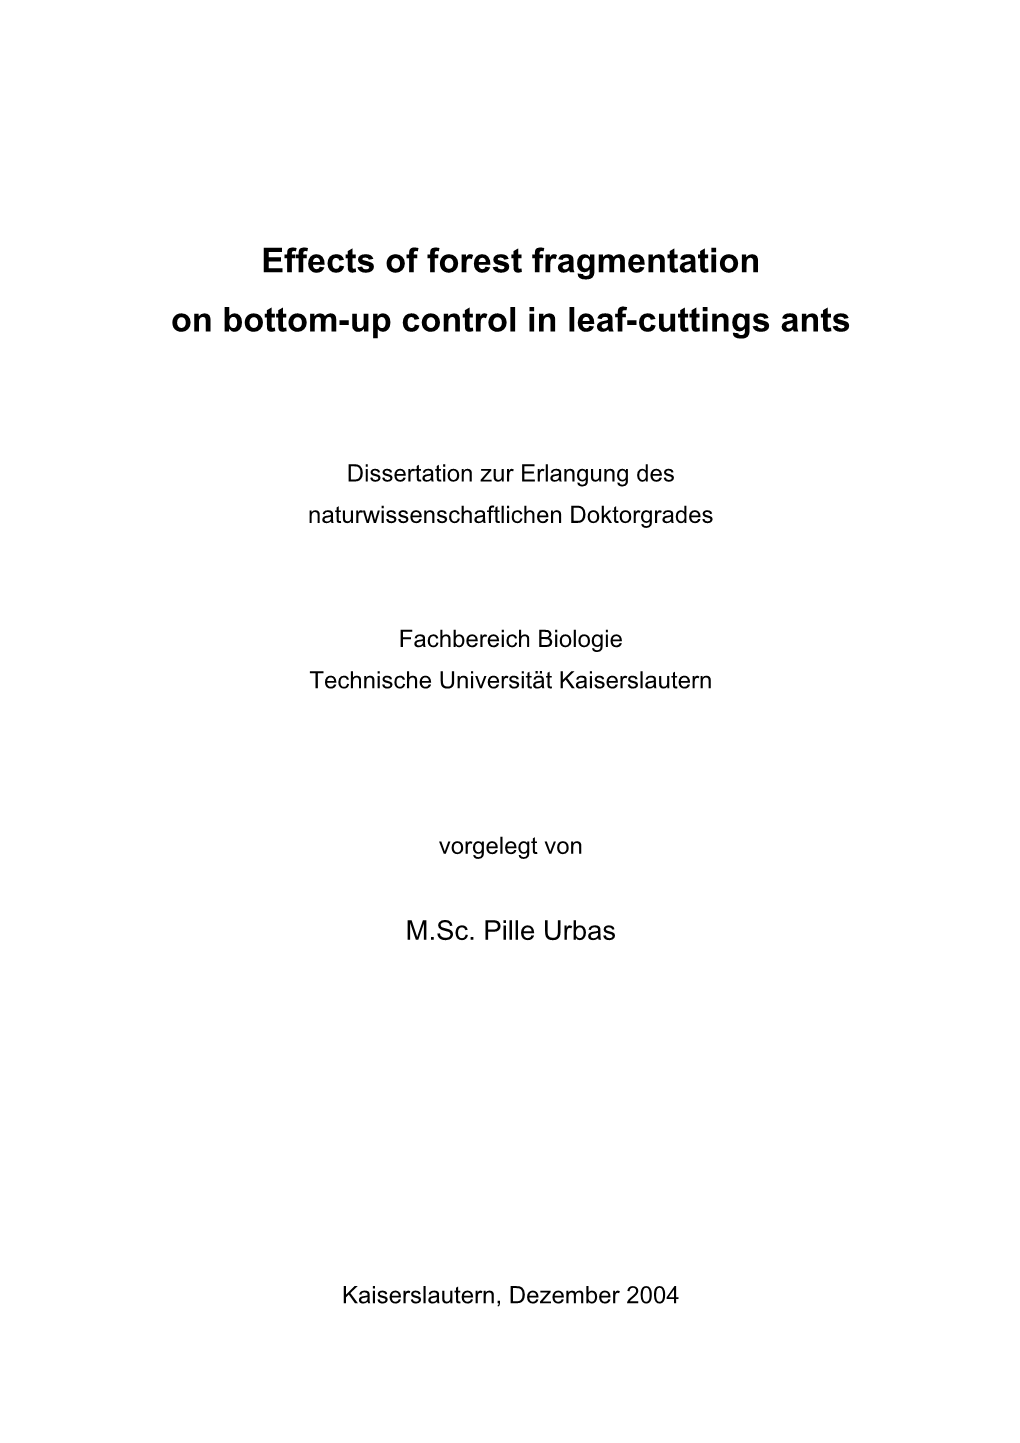 Effects of Forest Fragmentation on Bottom-Up Control in Leaf-Cuttings Ants